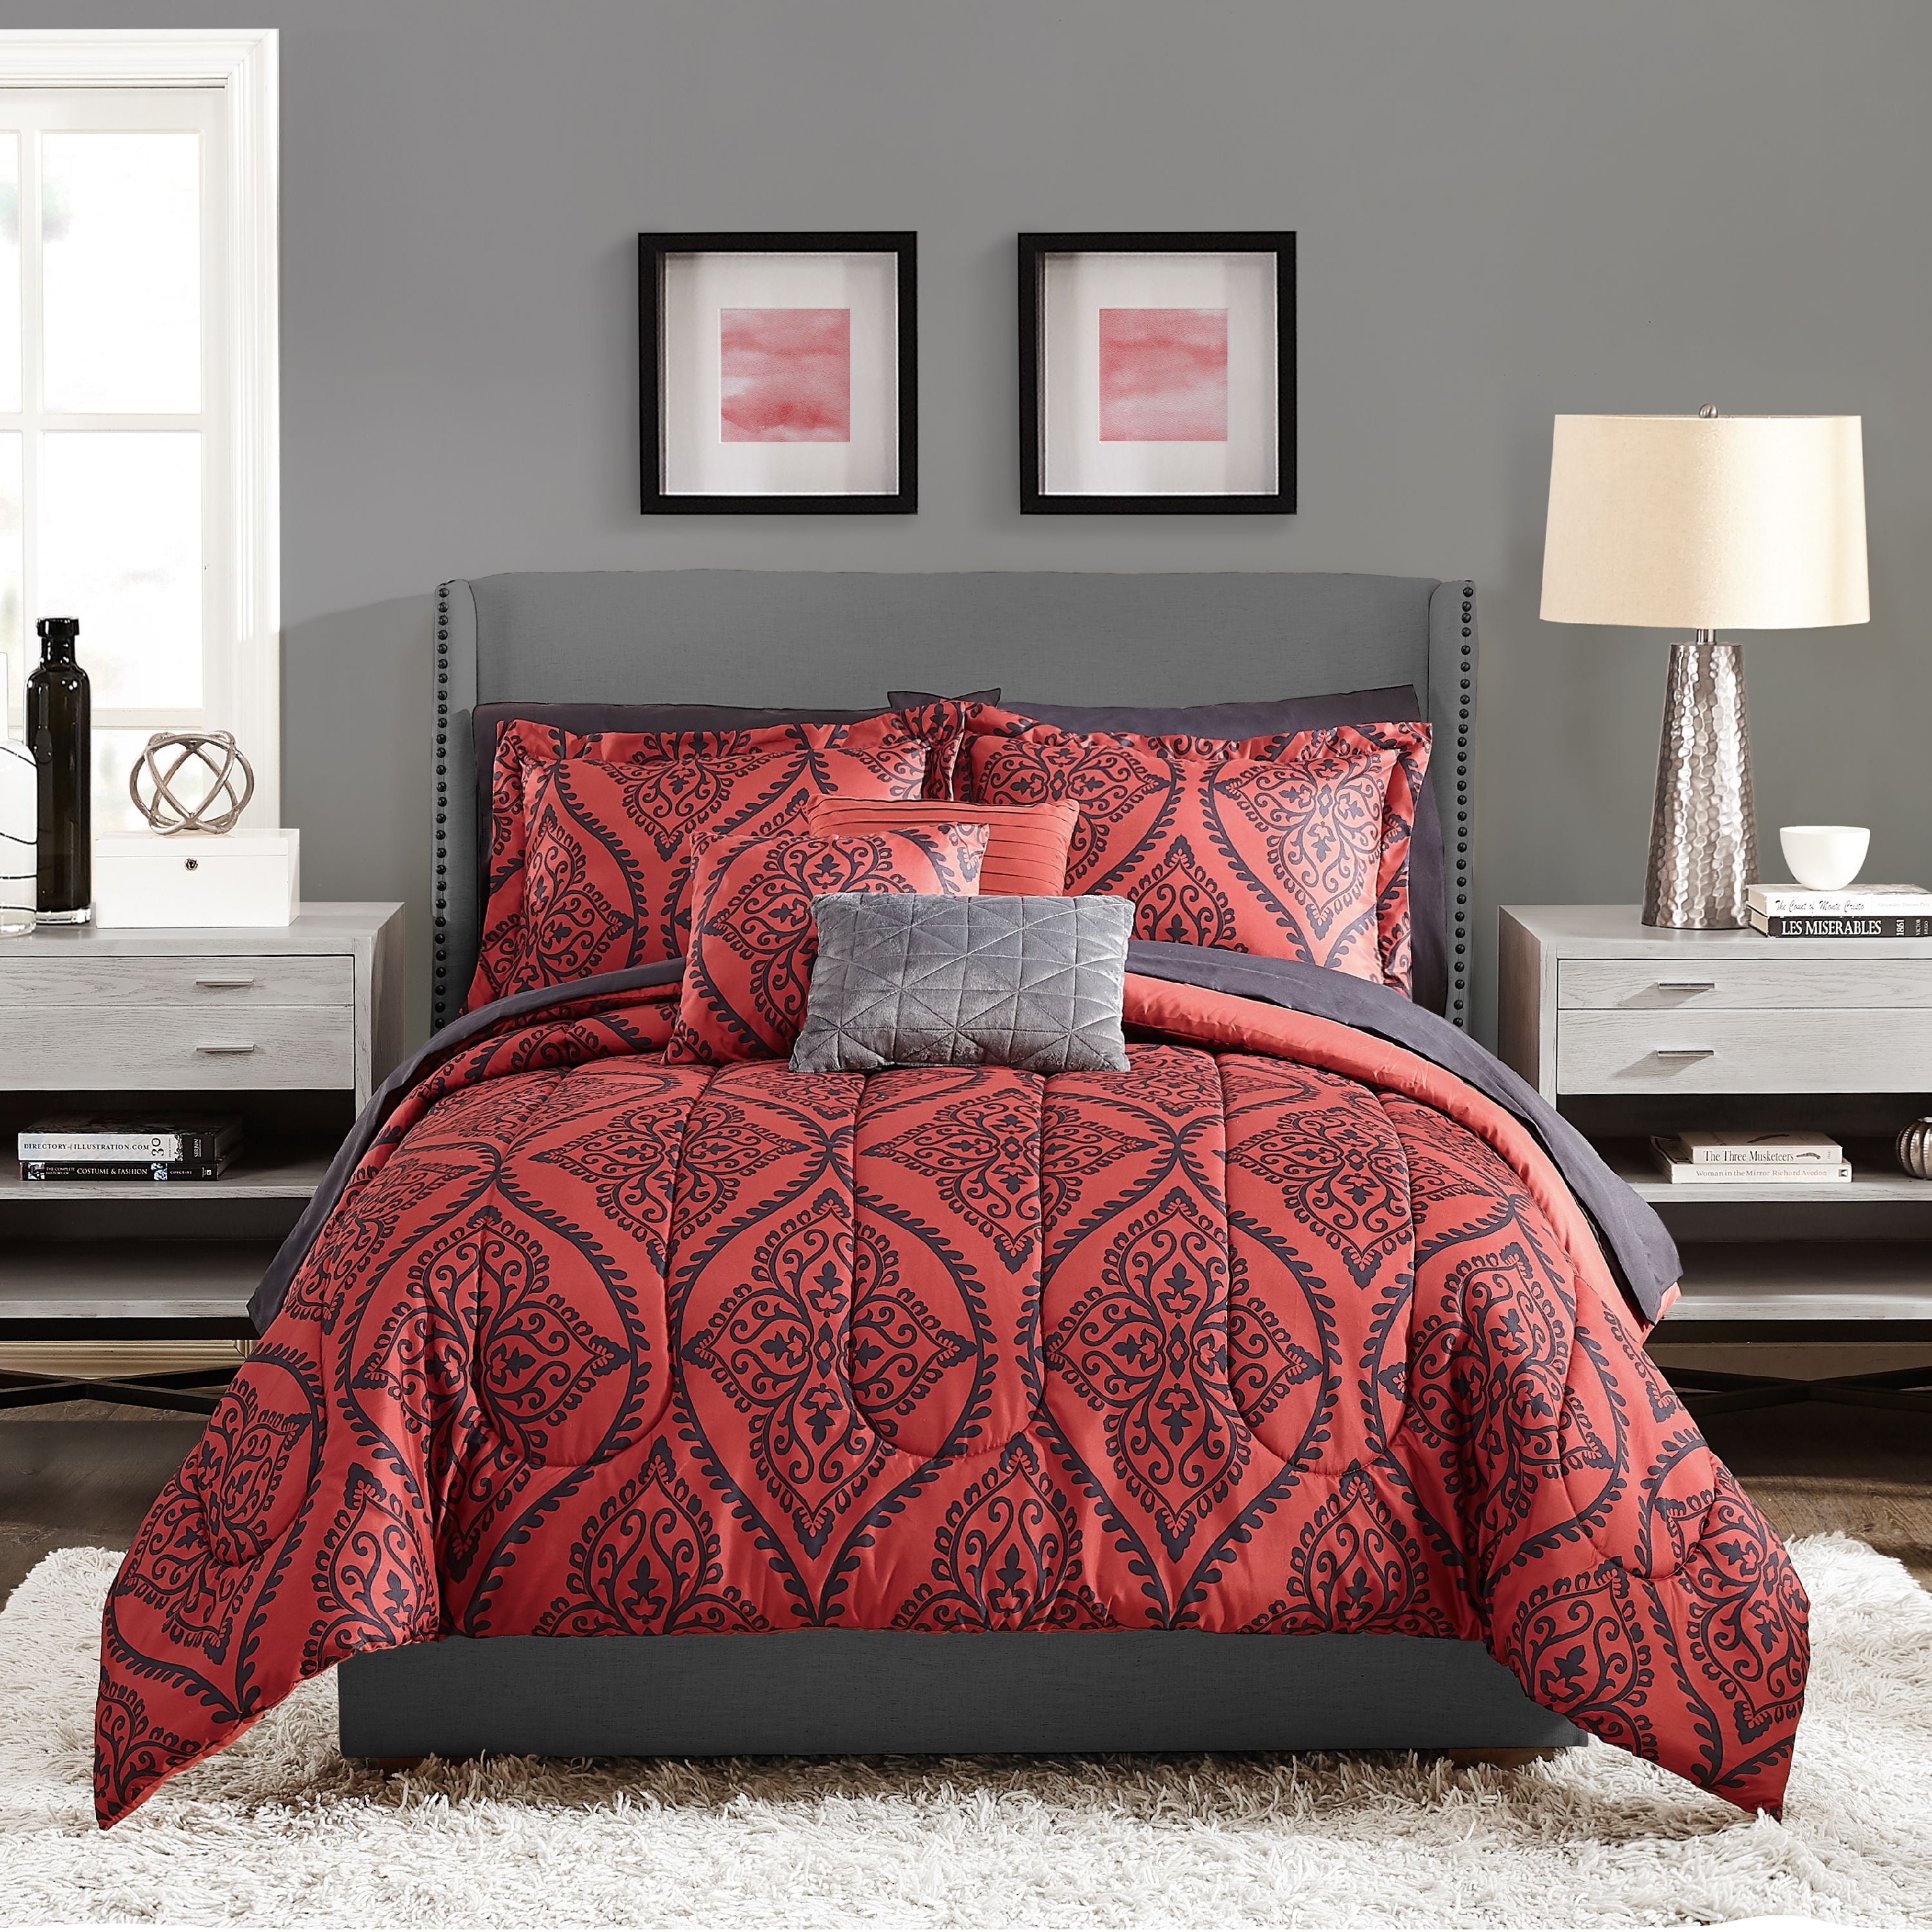 Mainstays Red and Black Damask 10 Piece Bed in a Bag King Comforter Set With Sheets